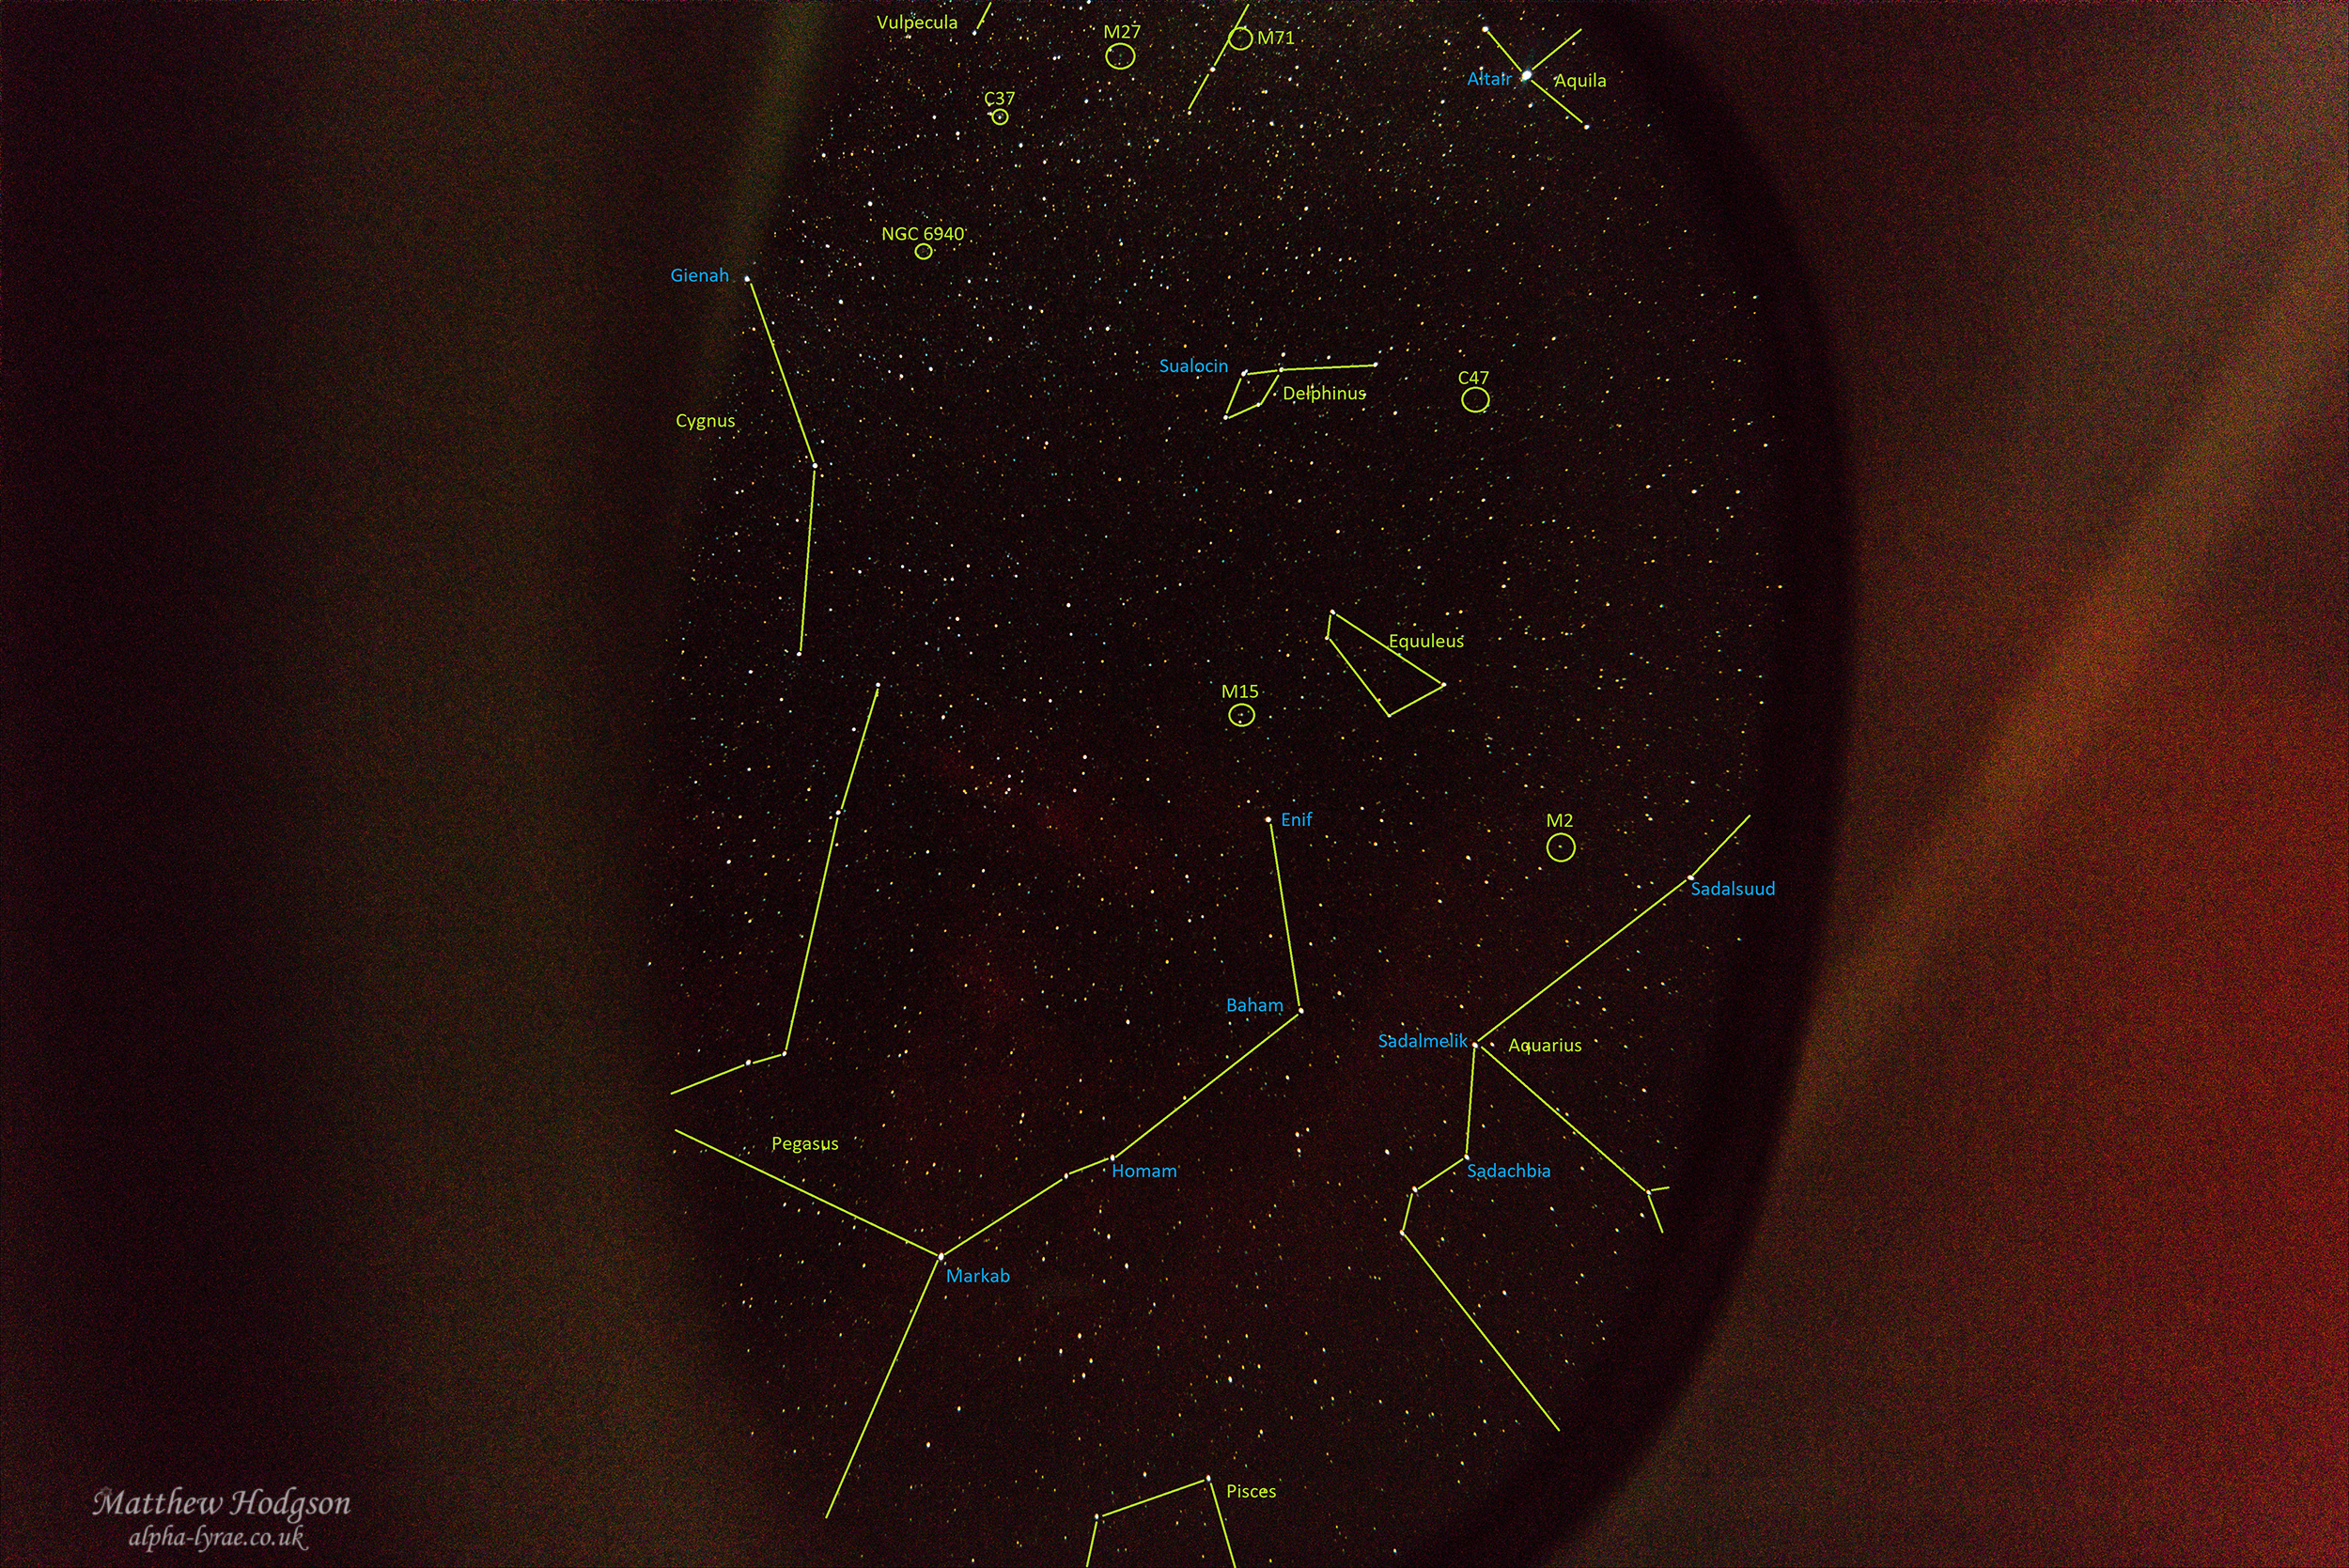 Labelled photo showing the constellations, some named stars and a few DSOs.